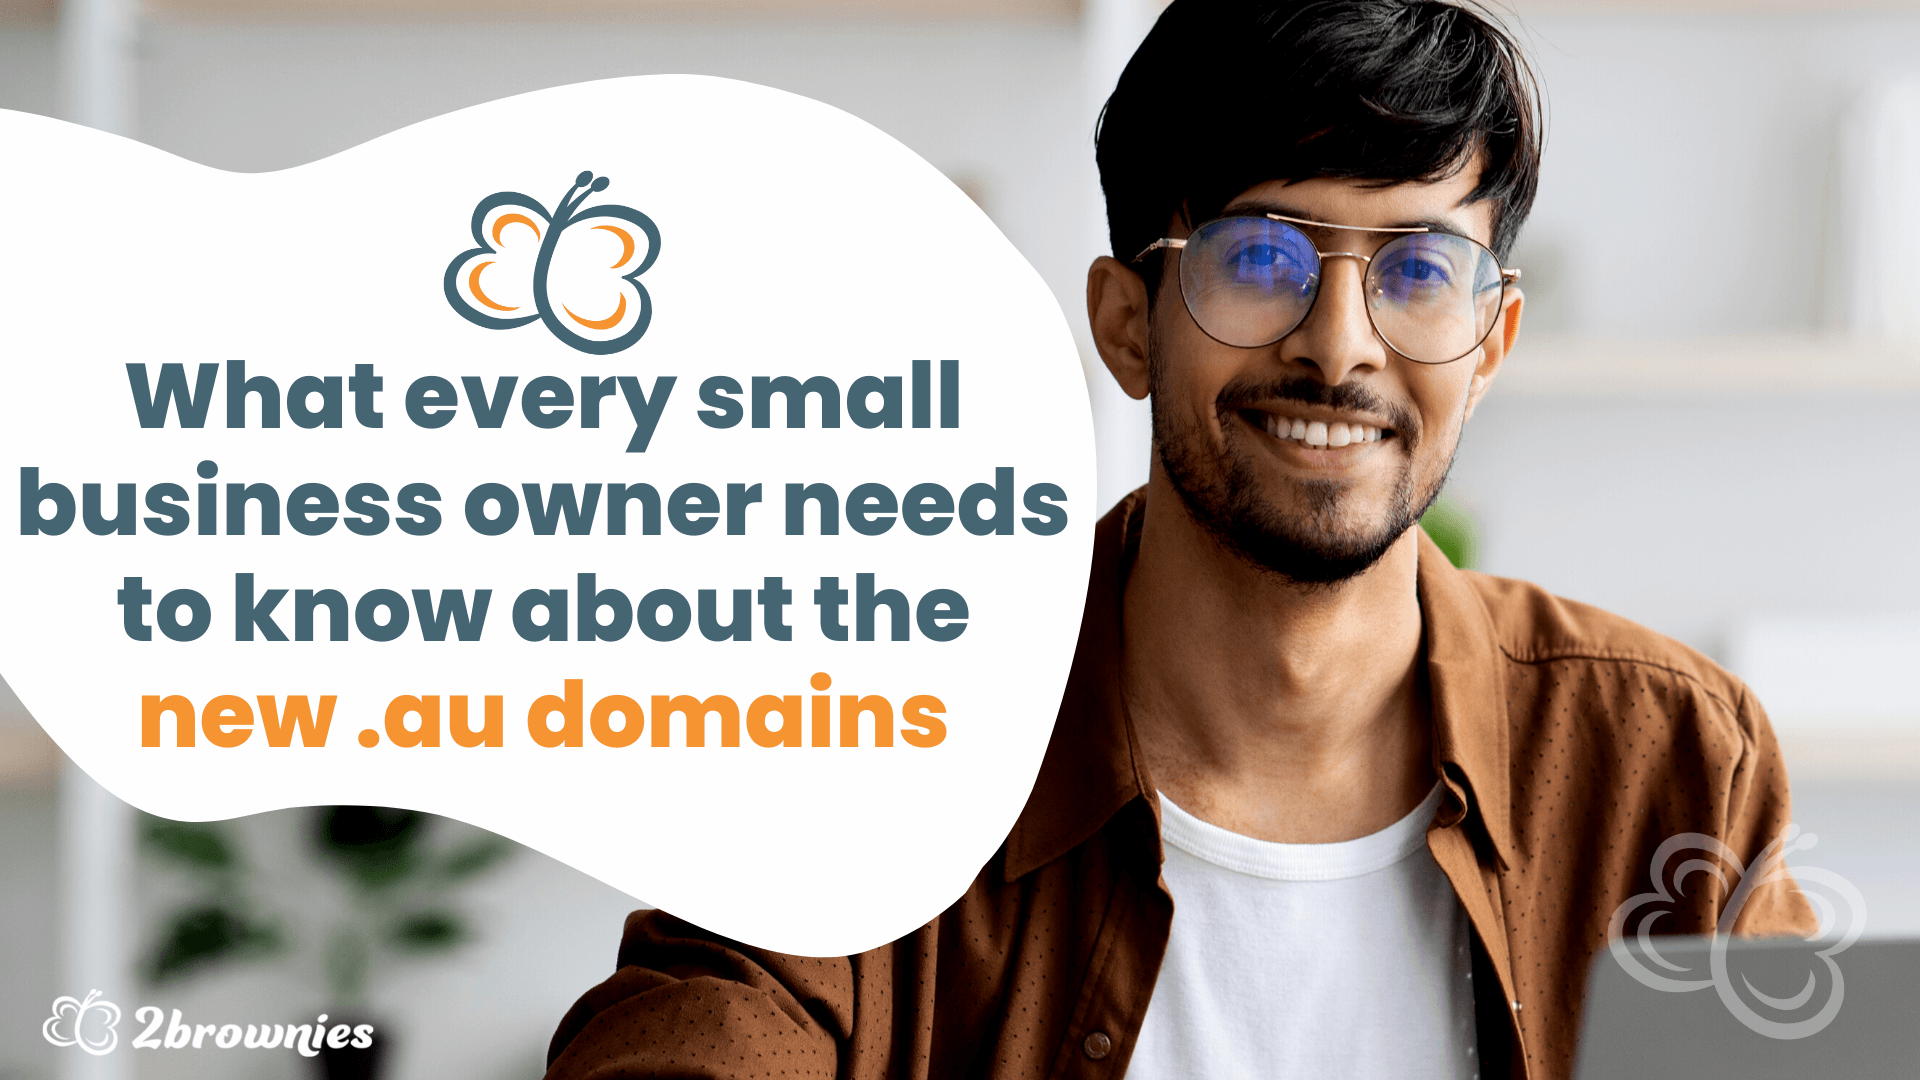 What every small business owner needs to know about the new .au domains, man smiles at camera